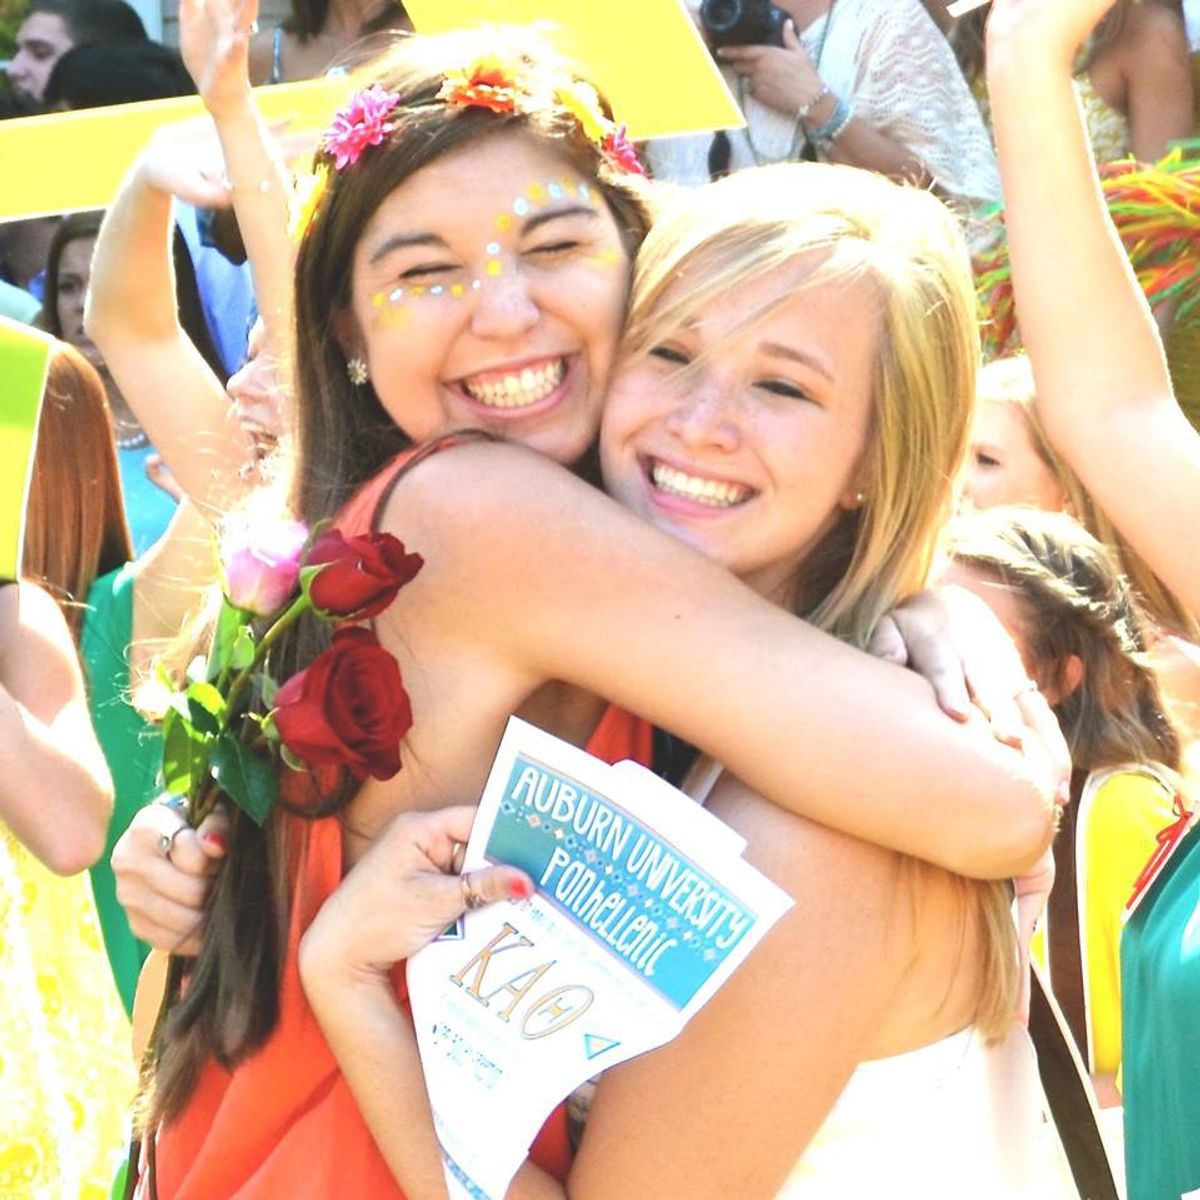 12 Things Every Girl Needs To Know Before Going Through Sorority Recruitment